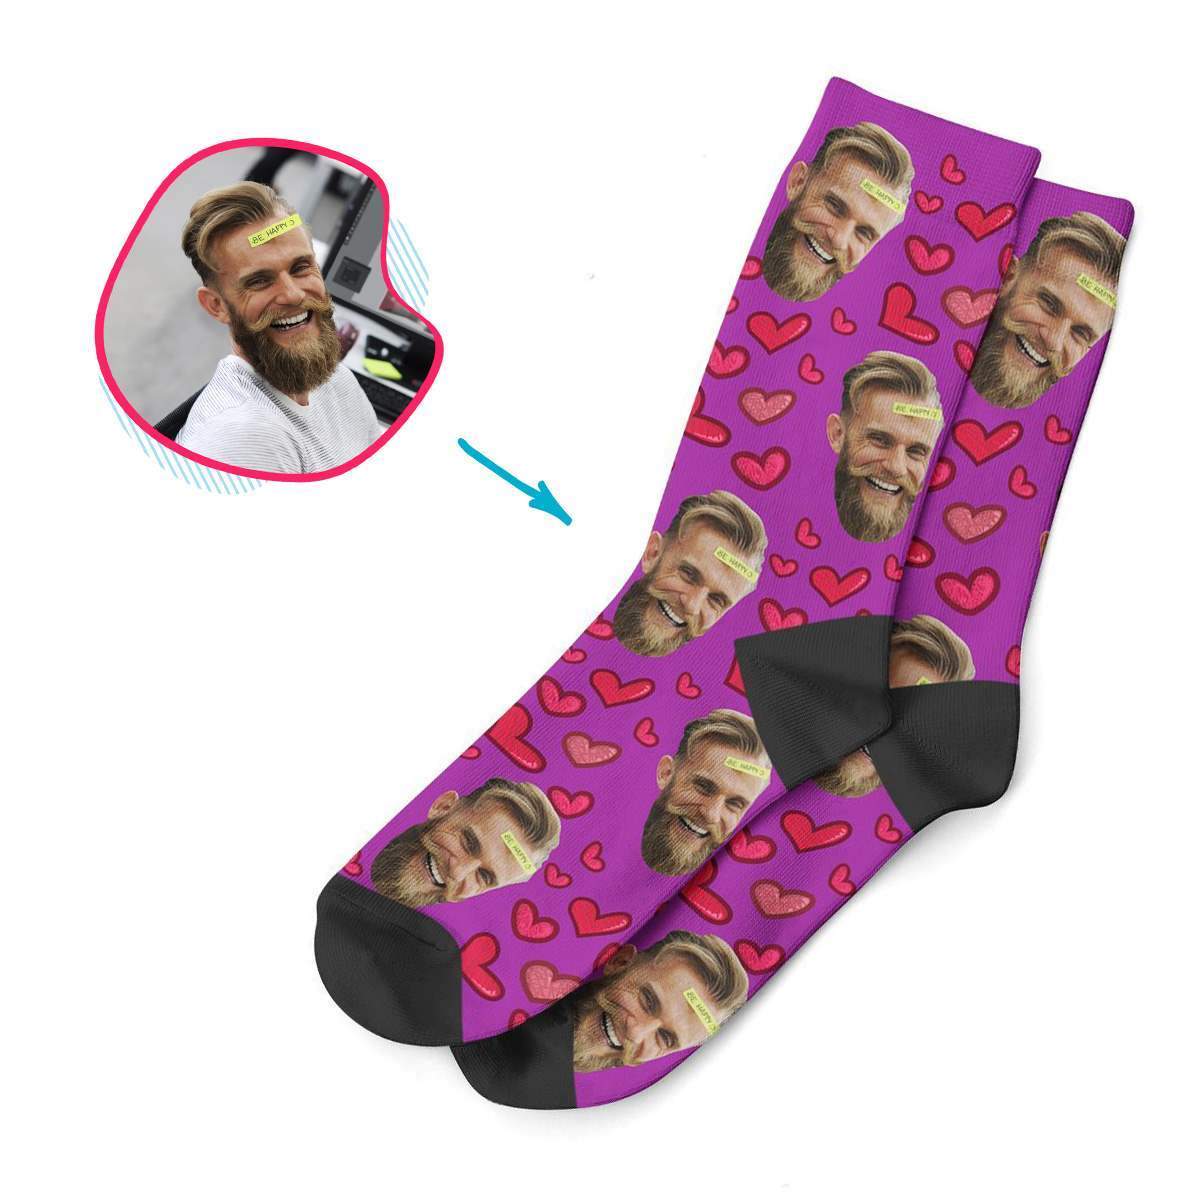 purple Heart socks personalized with photo of face printed on them